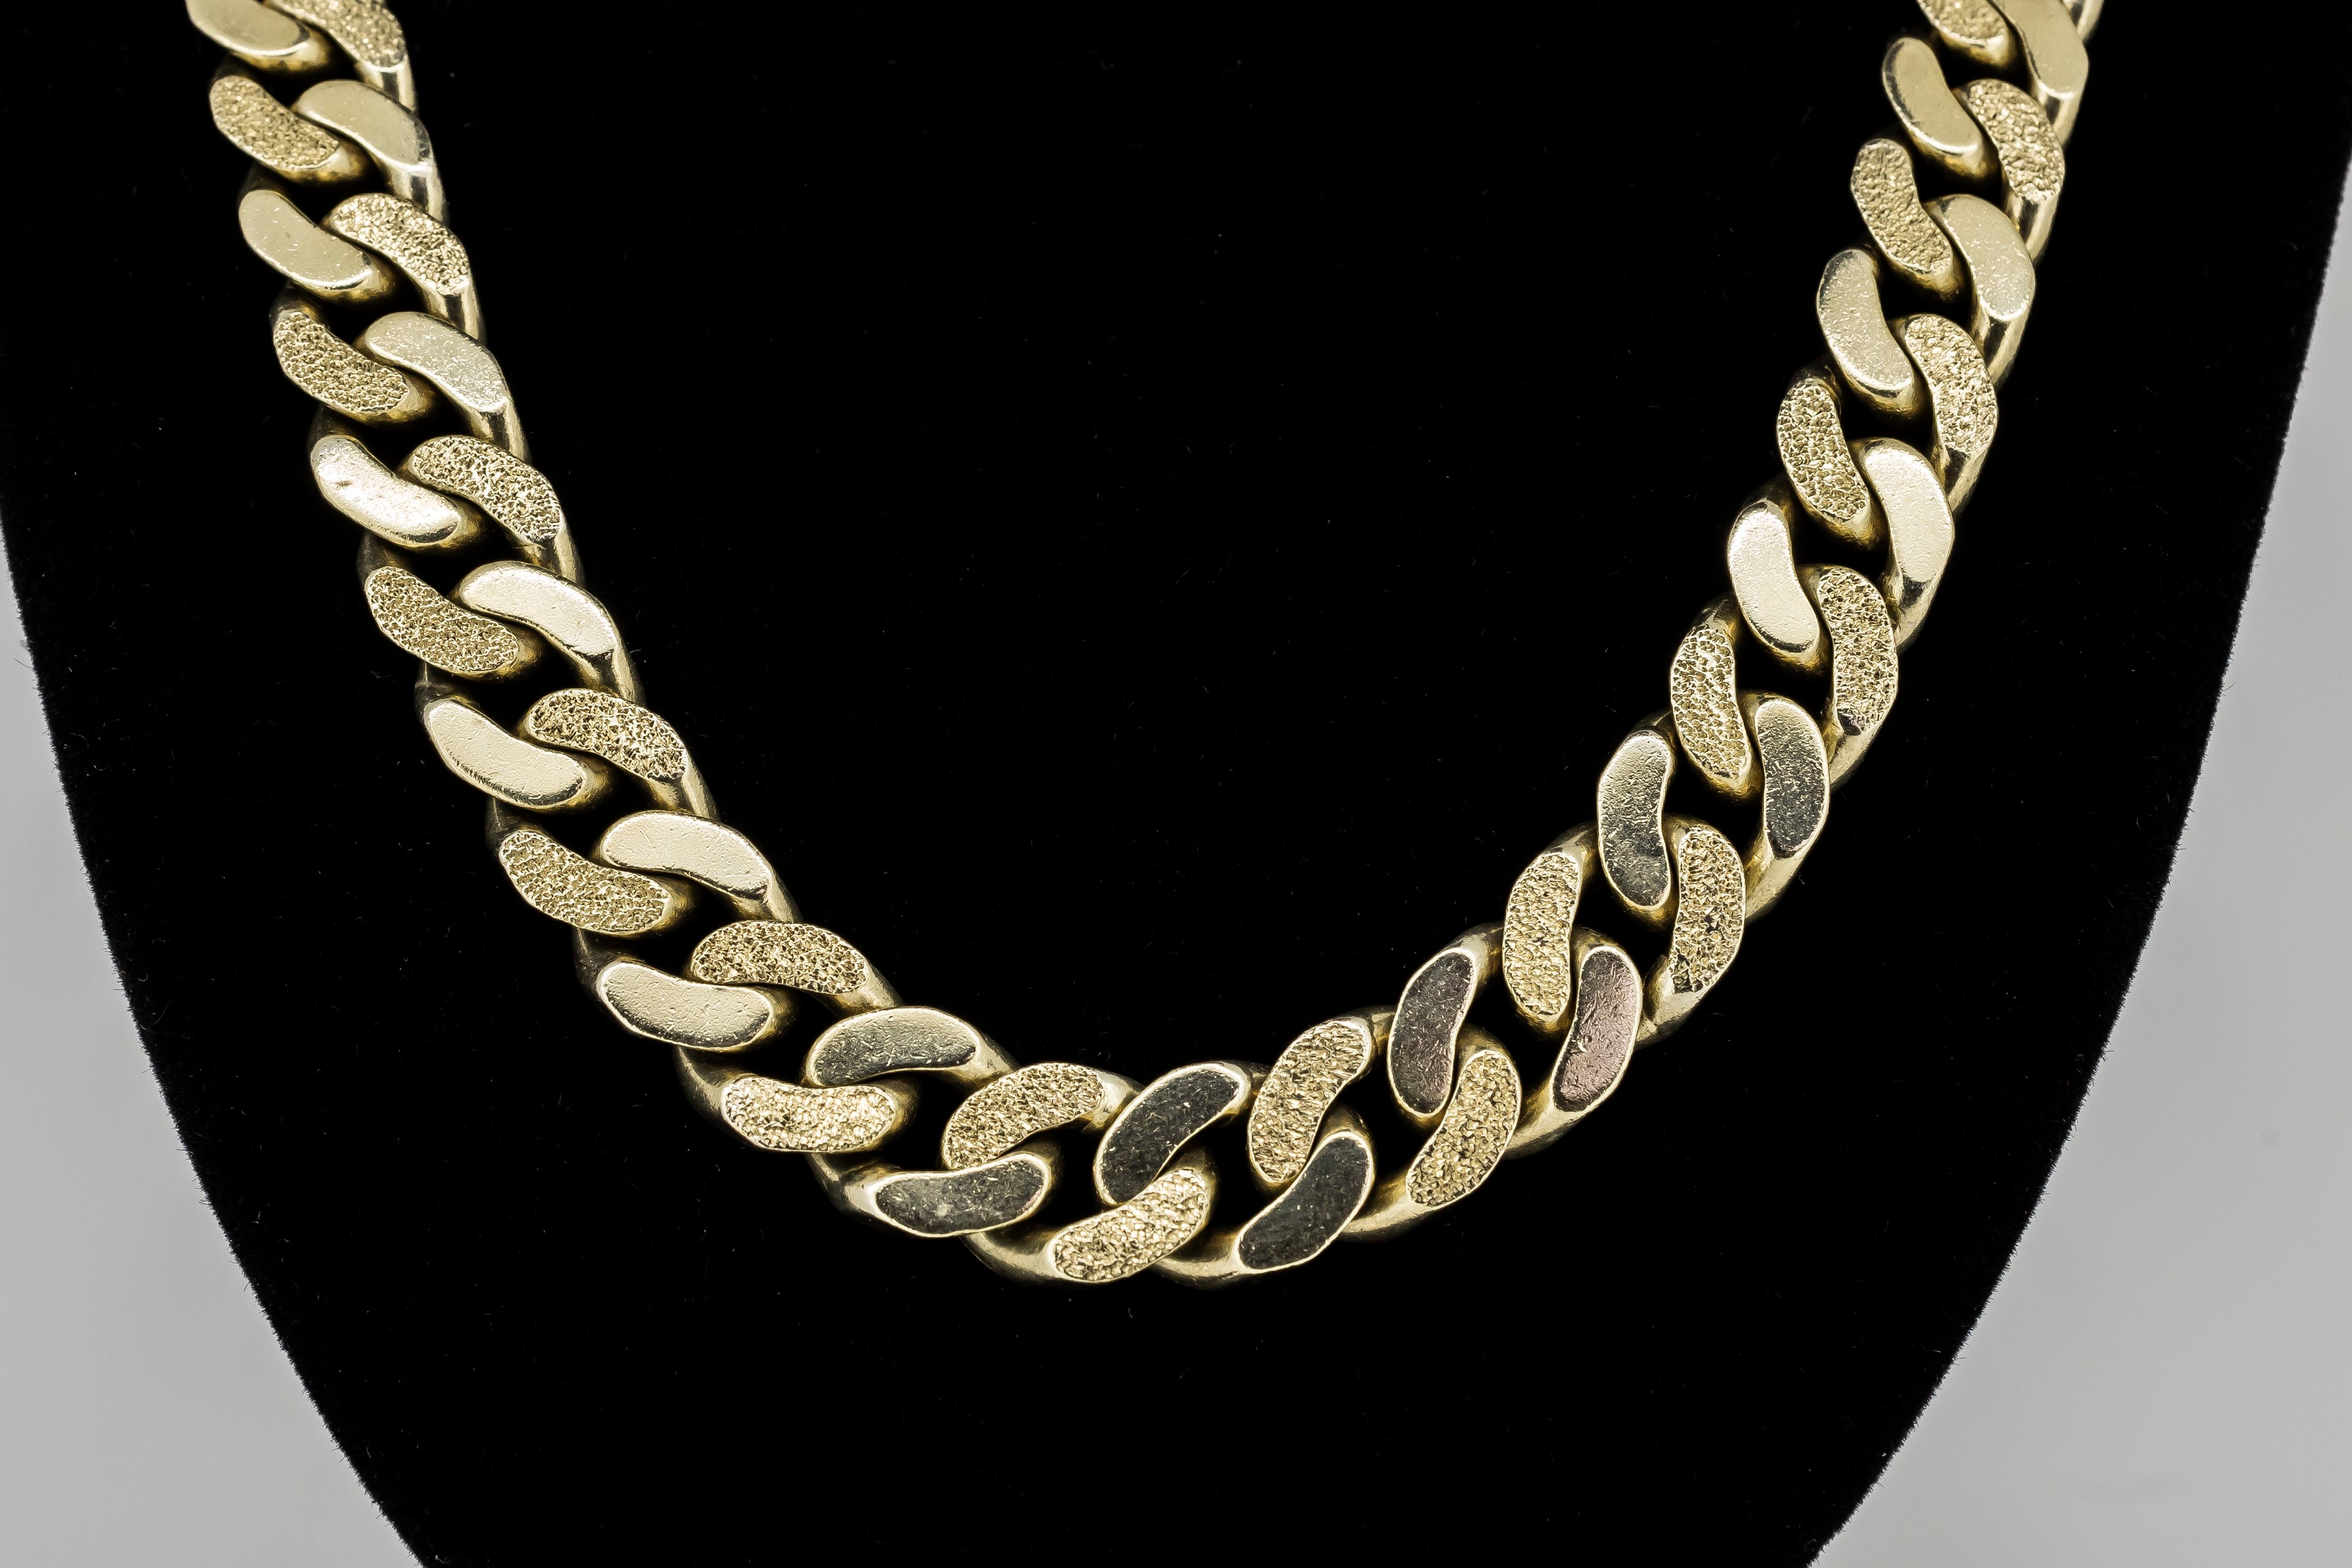 Mens Gold Chain Essentials: Styles & Care Tips